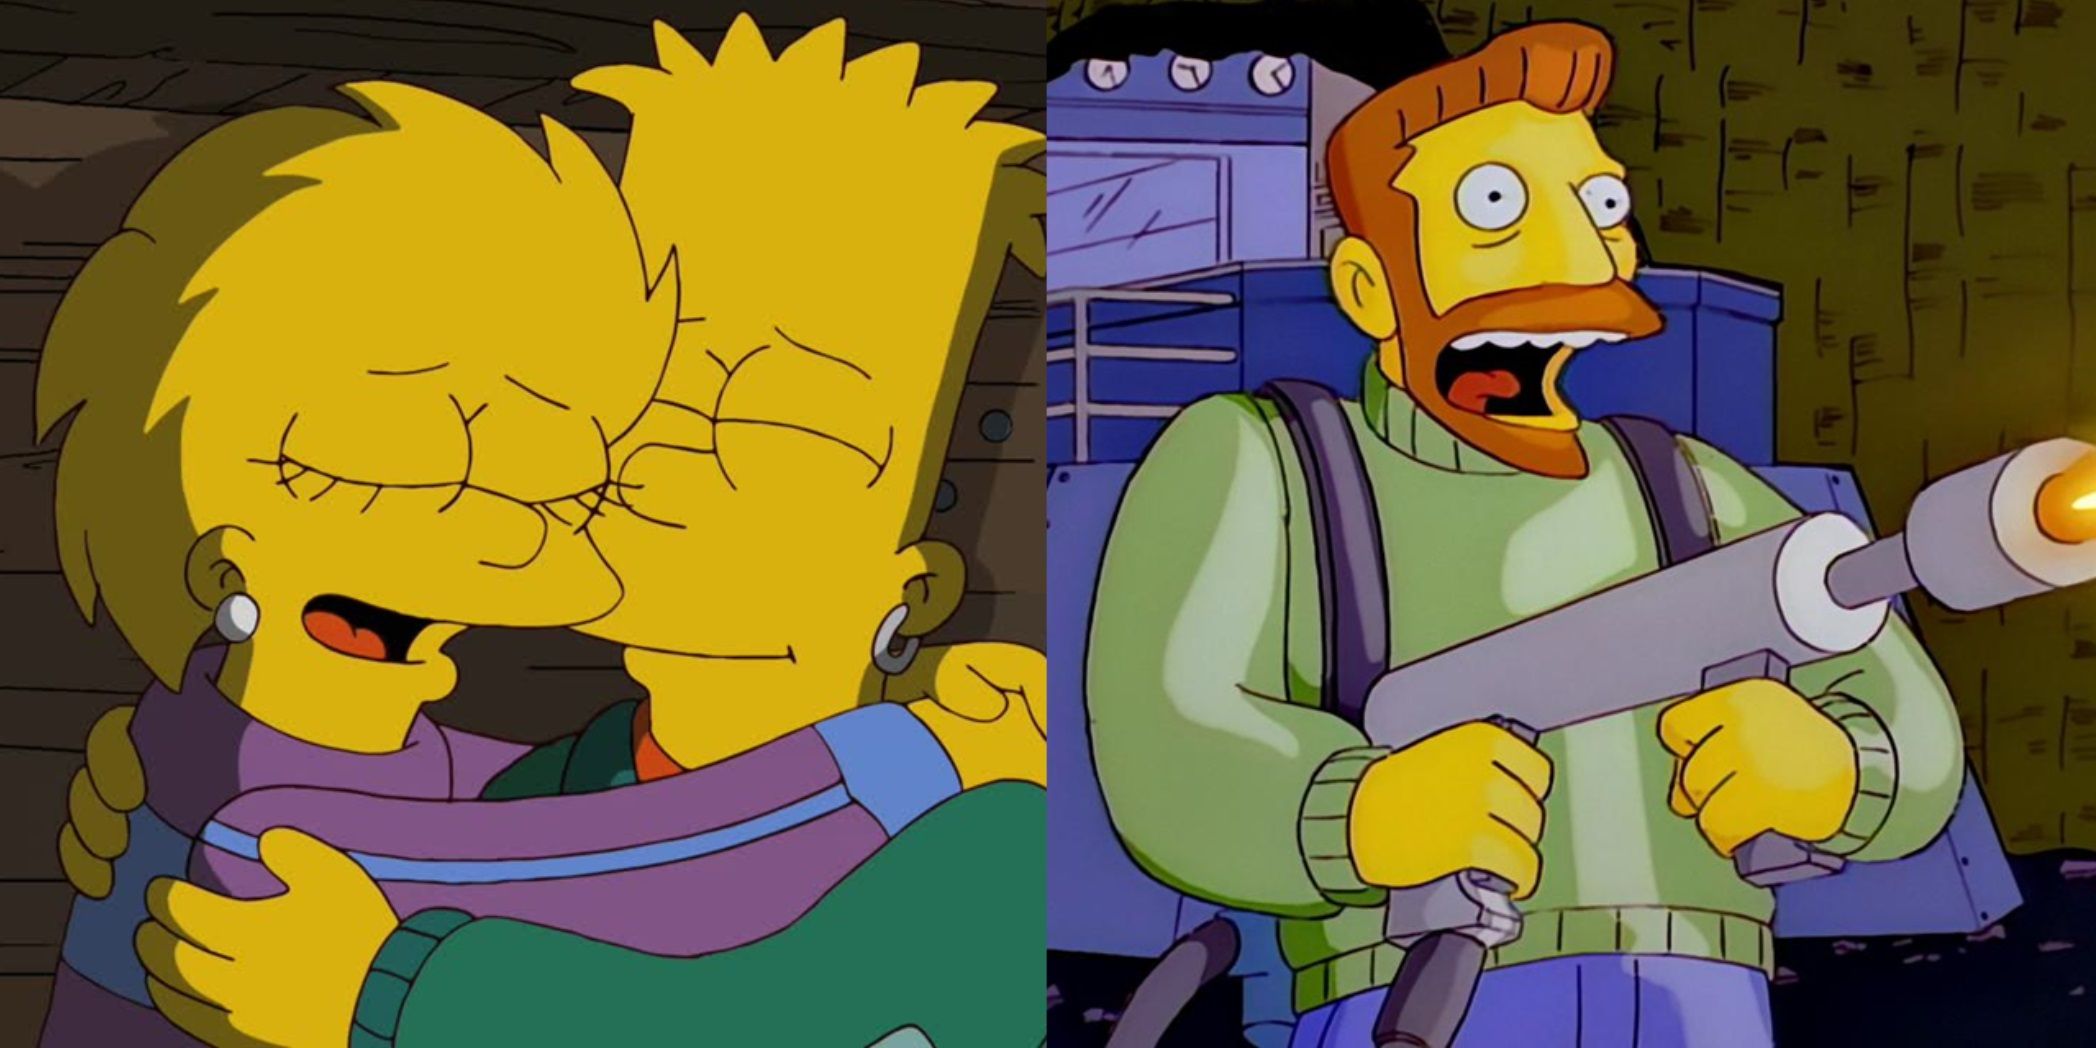 Split image of Bart and Lisa hugging in a flash forward and Hank Scorpio using a flamethrower in The Simpsons